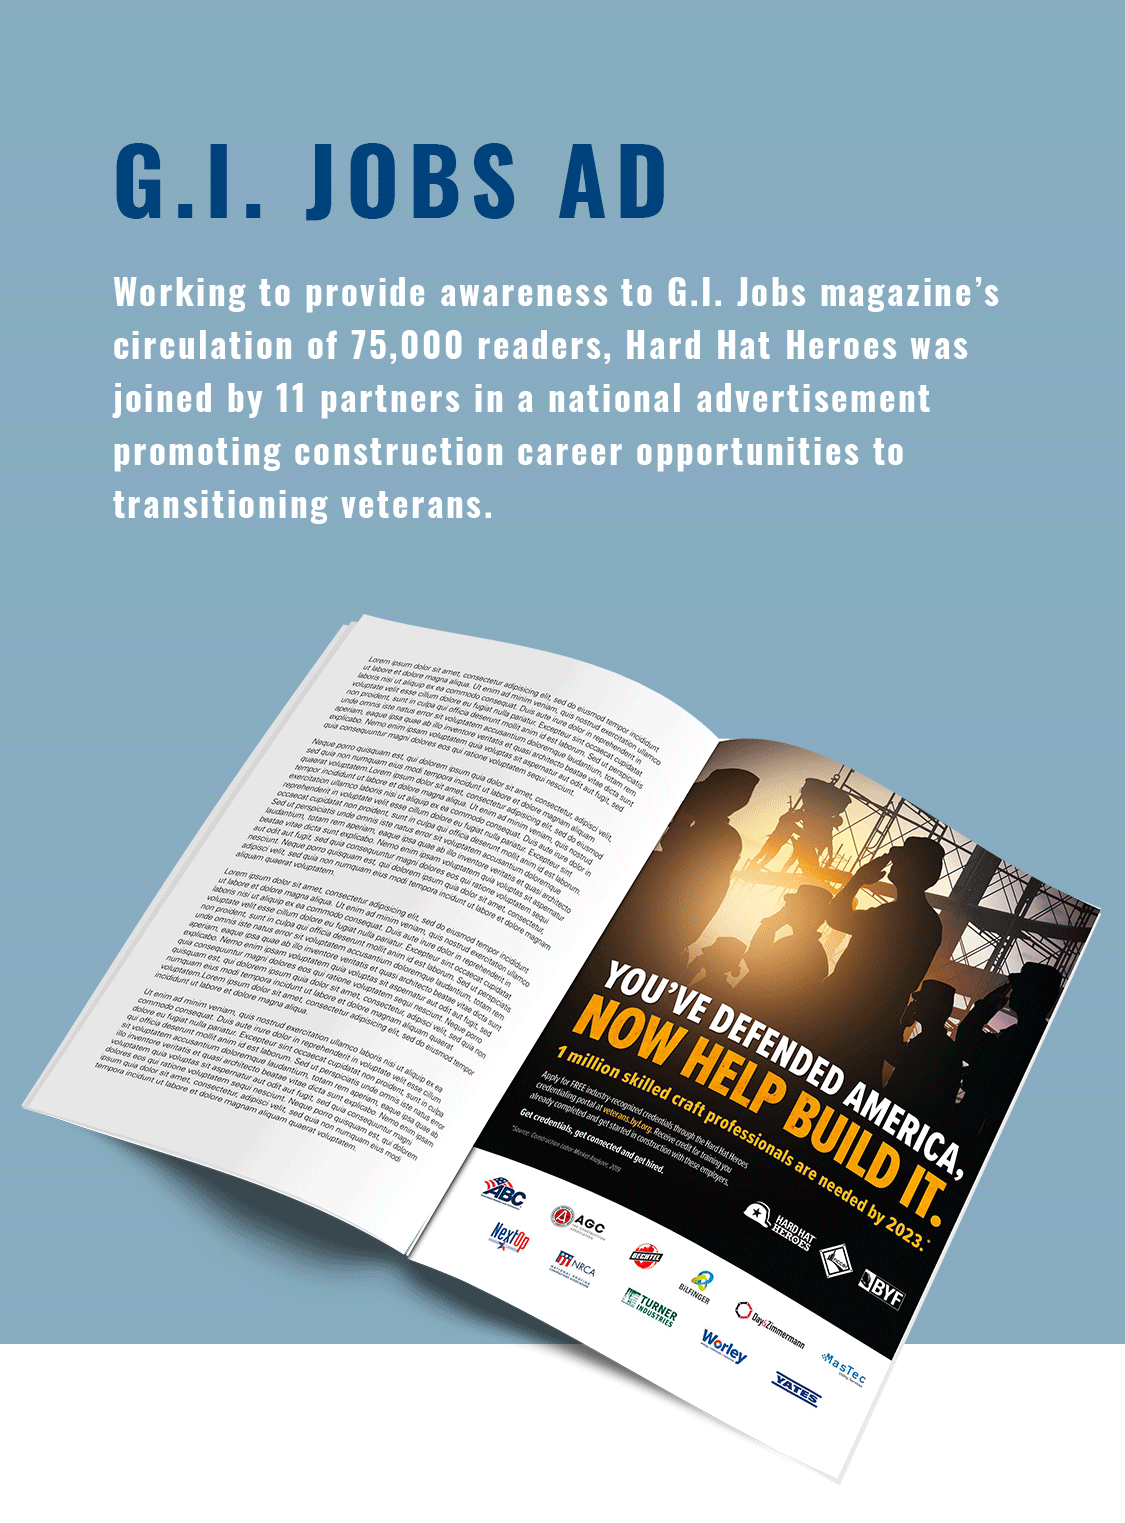 G.I. Jobs Ad. Working to provide awareness to G.I. Jobs magazine’s circulation of 75,000 readers, Hard Hat Heroes was joined by 11 partners in a national advertisement promoting construction career opportunities to transitioning veterans.